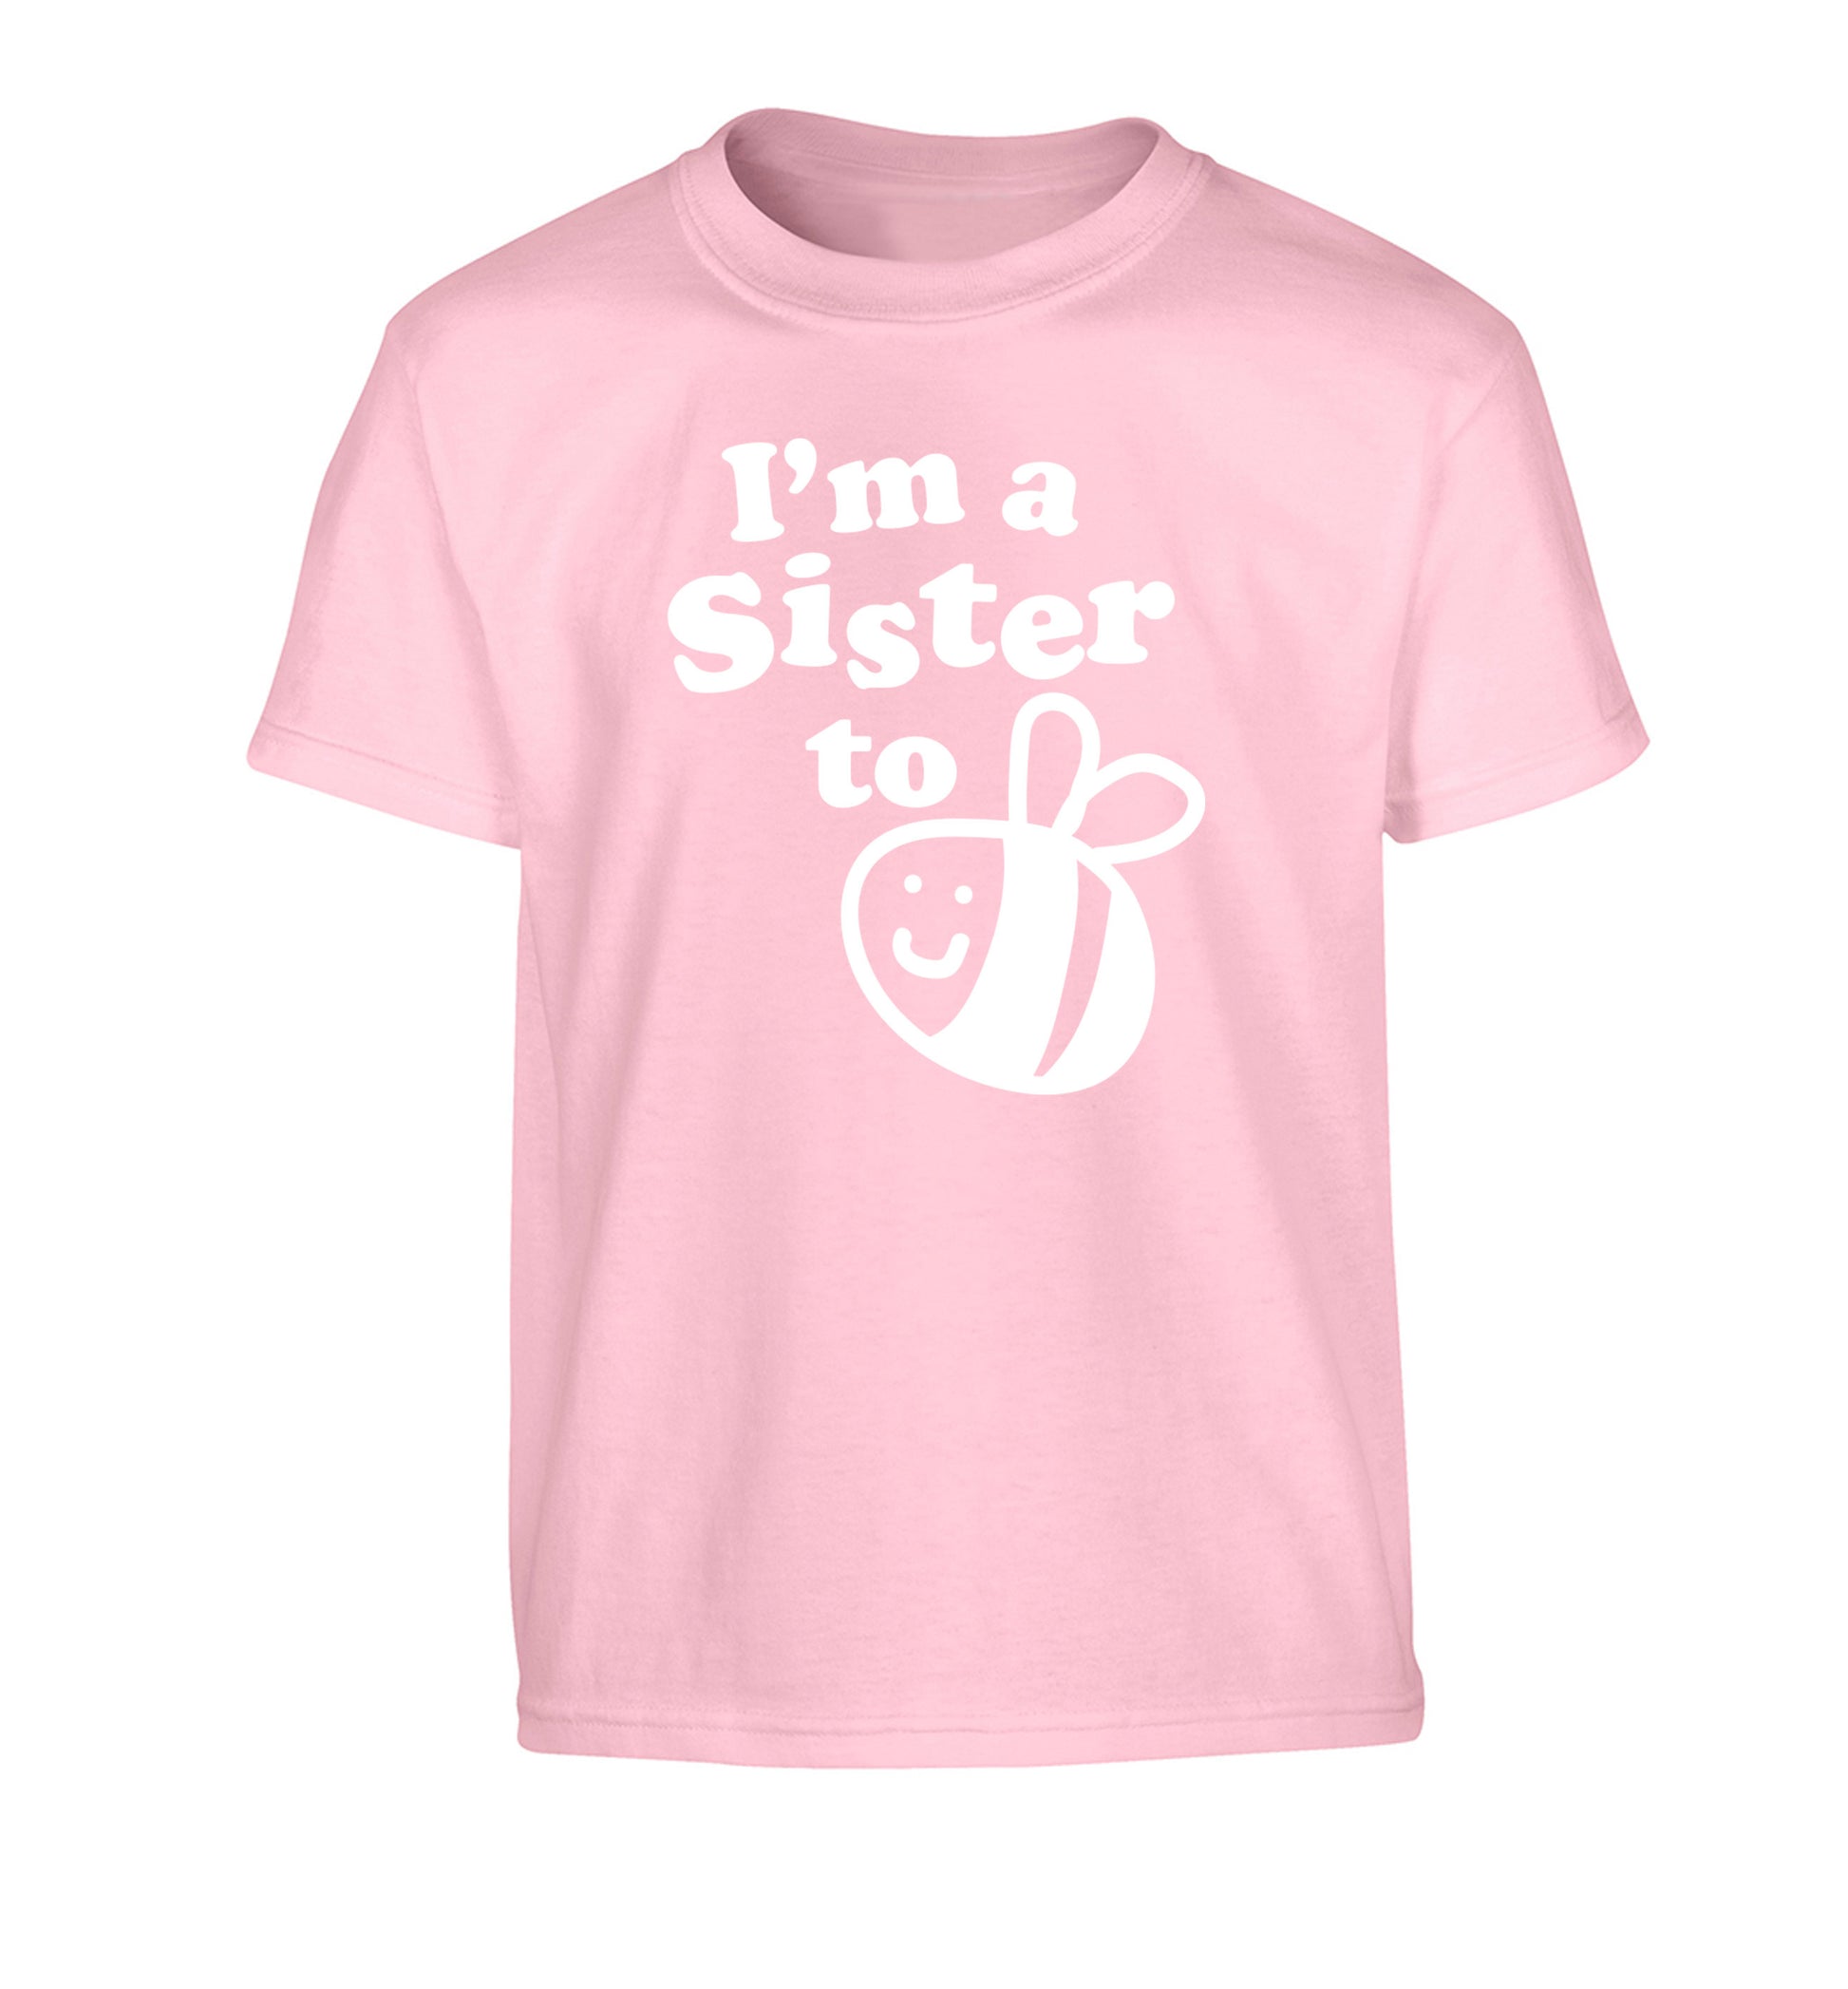 I'm a sister to be Children's light pink Tshirt 12-14 Years